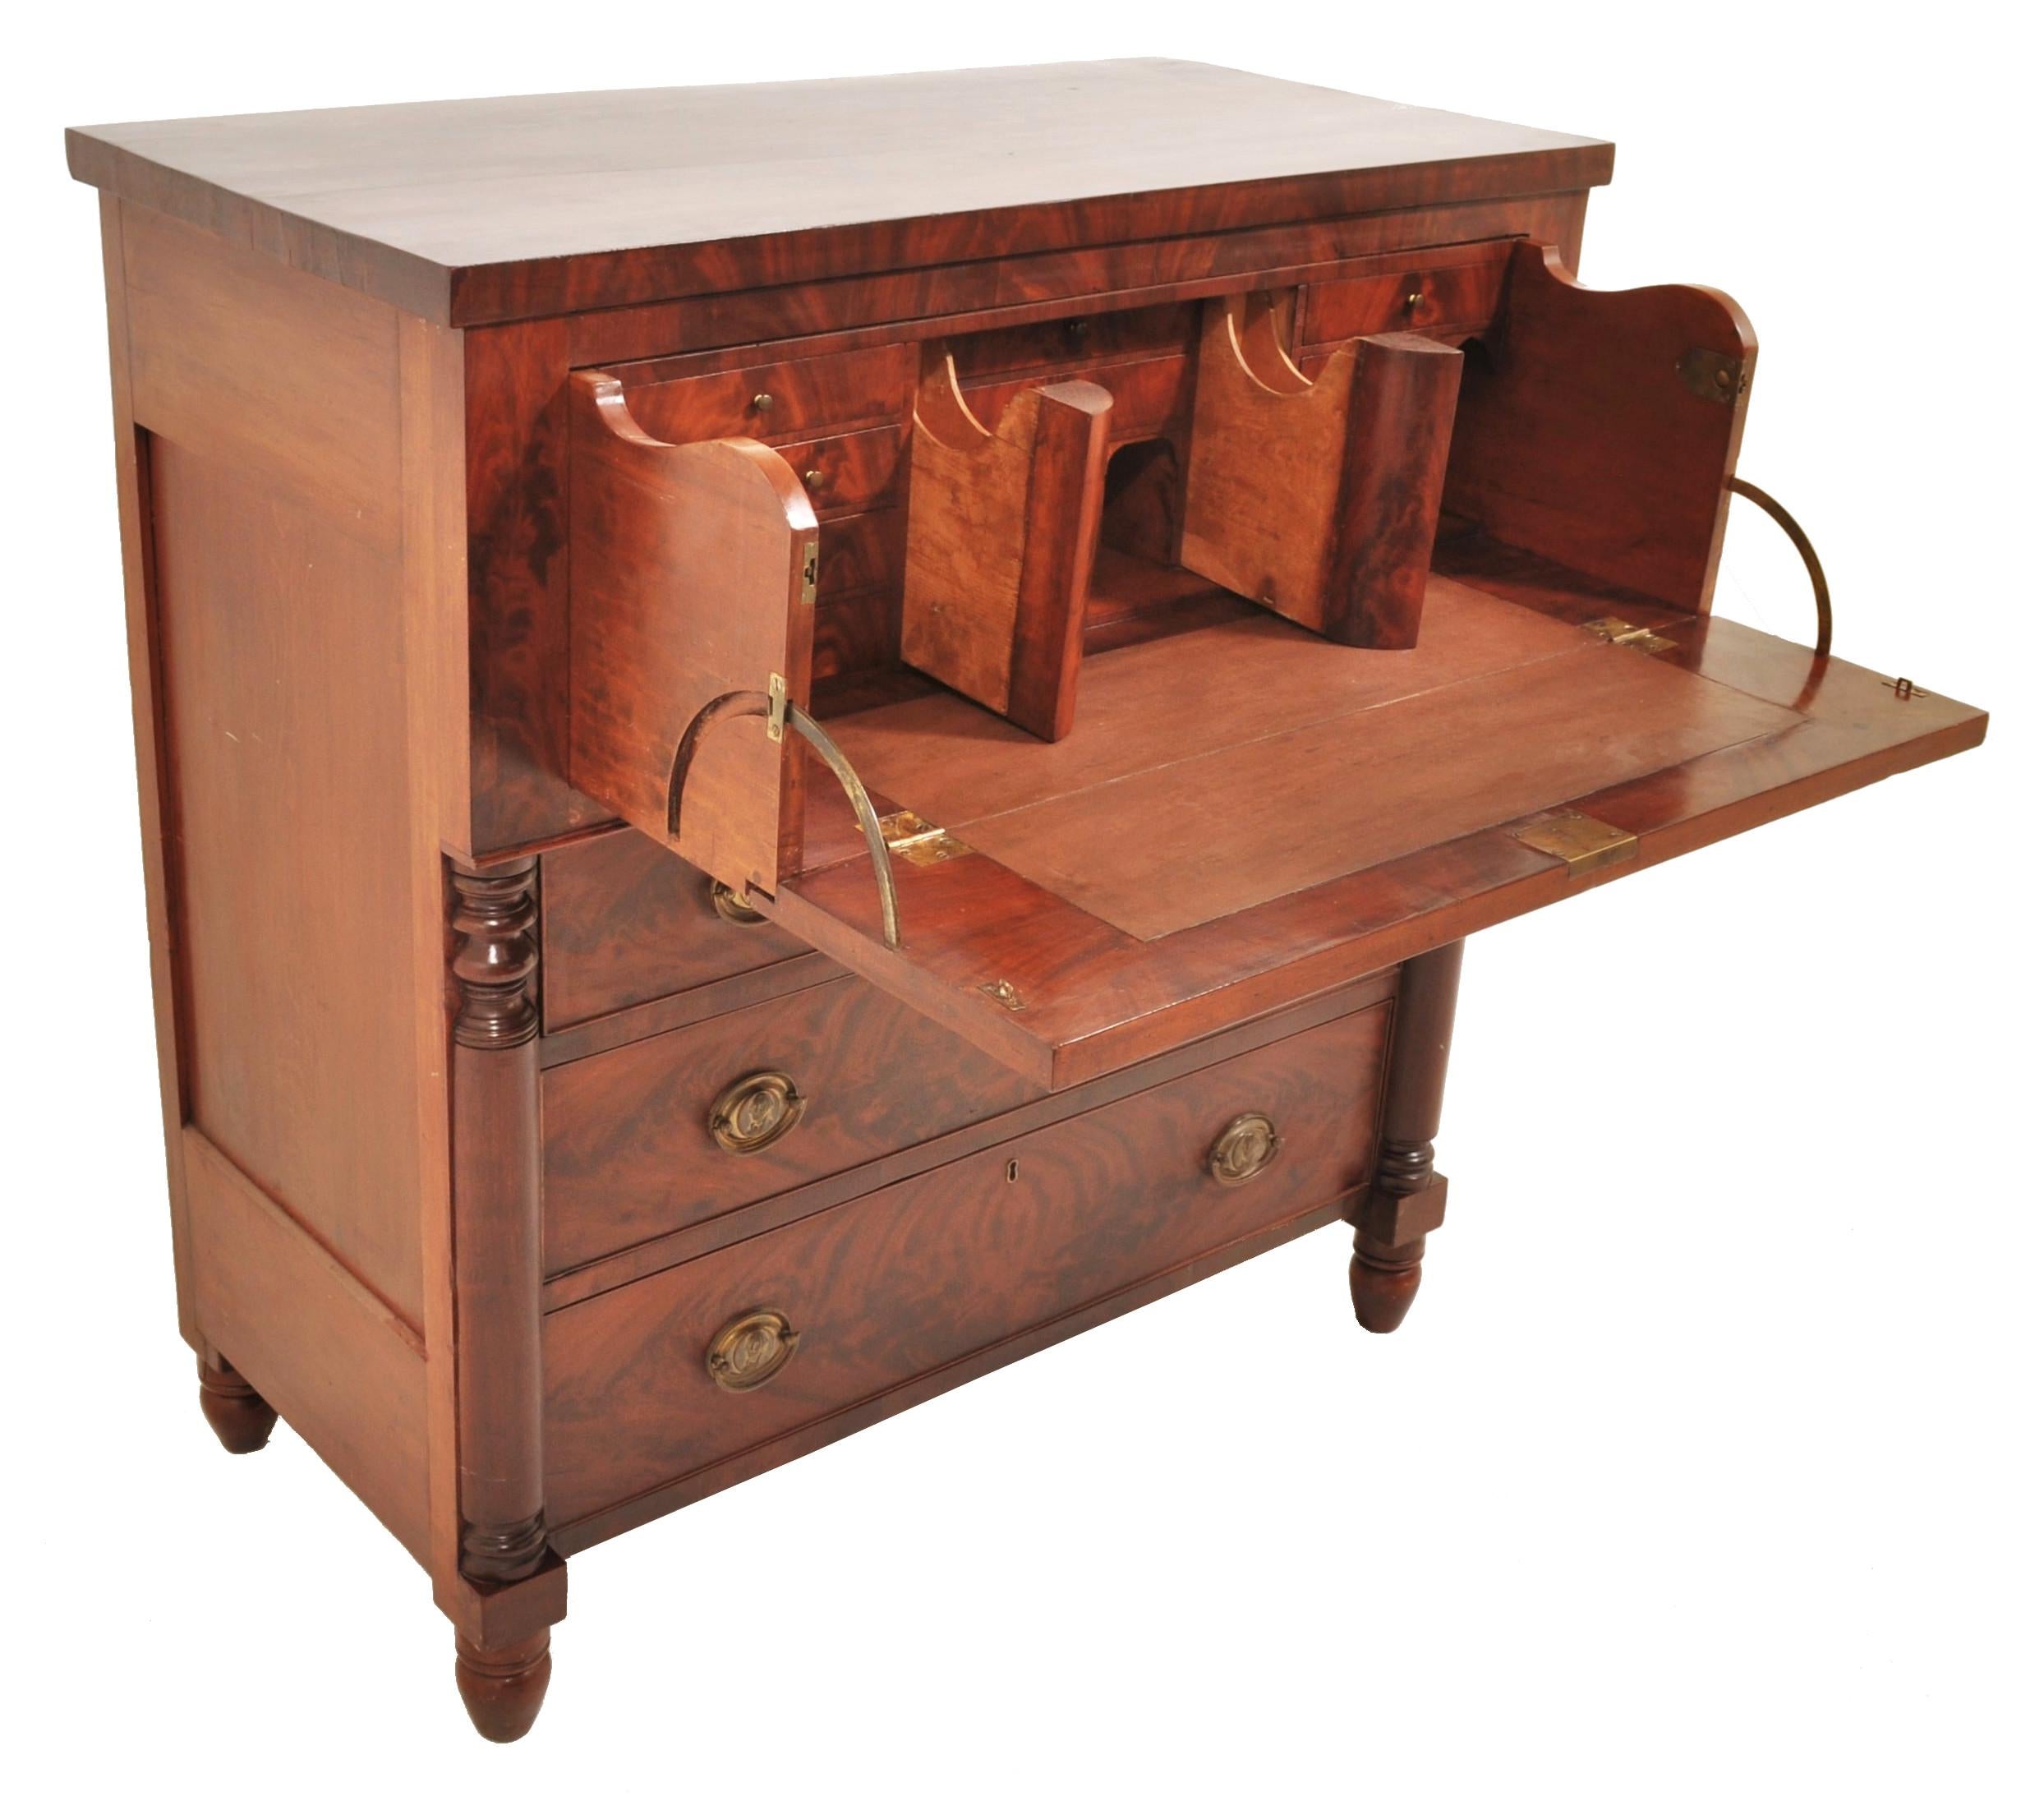 Antique American mahogany Baltimore 'Butler's' desk/secretary chest, circa 1820. The desk made of fine figured mahogany, the top drawer being a fall front secretary with a fitted interior and having three graduated drawers below. The drawers having